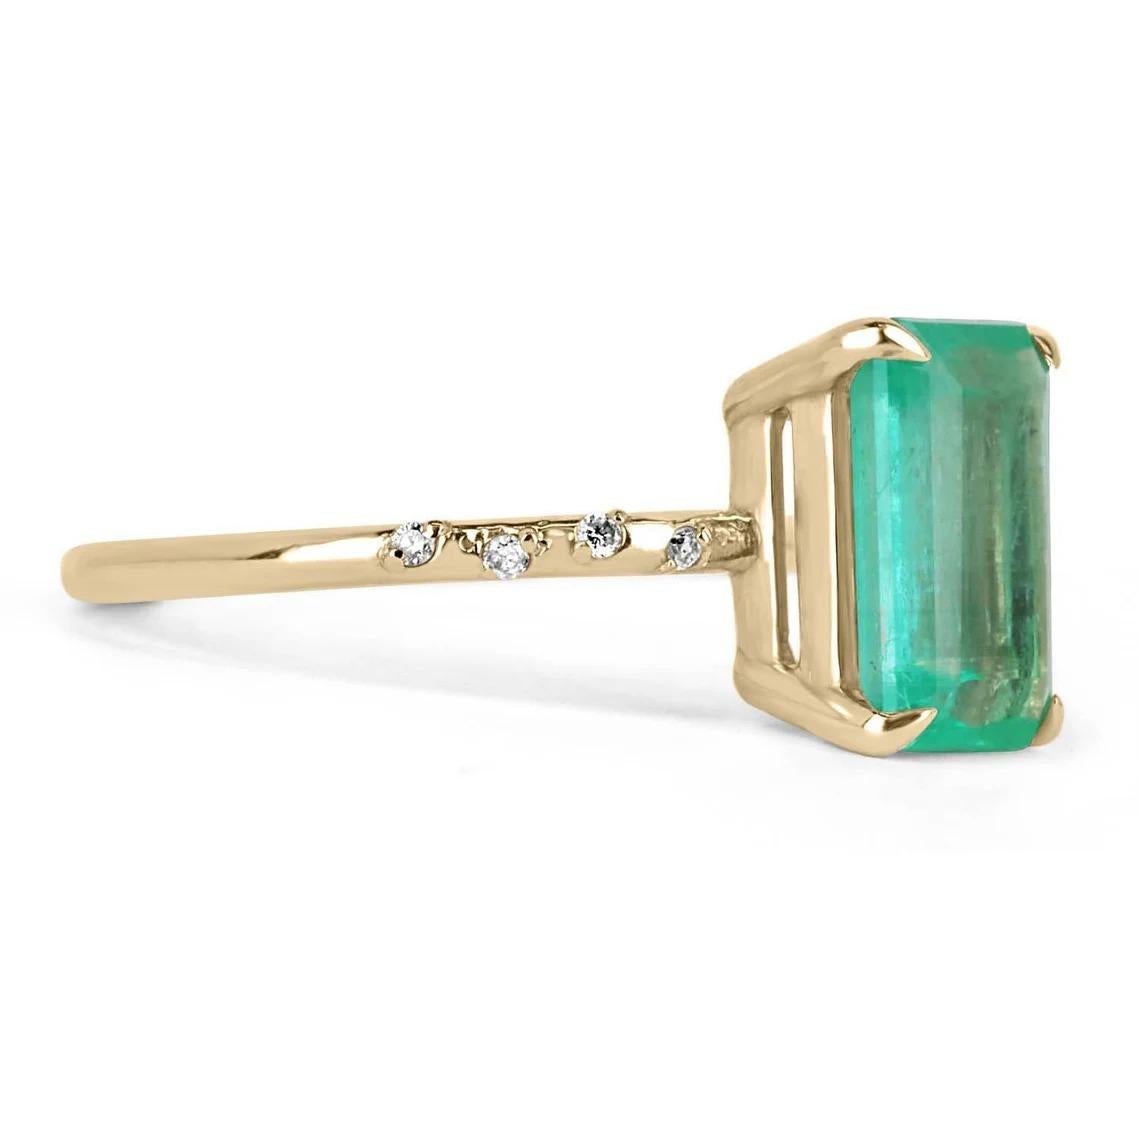 Displayed is a modern emerald and diamond solitaire engagement ring/right-hand ring in 14K yellow gold. This gorgeous solitaire ring carries a full 2.40-carat emerald in a four-prong setting. The emerald has very good clarity with minor flaws that